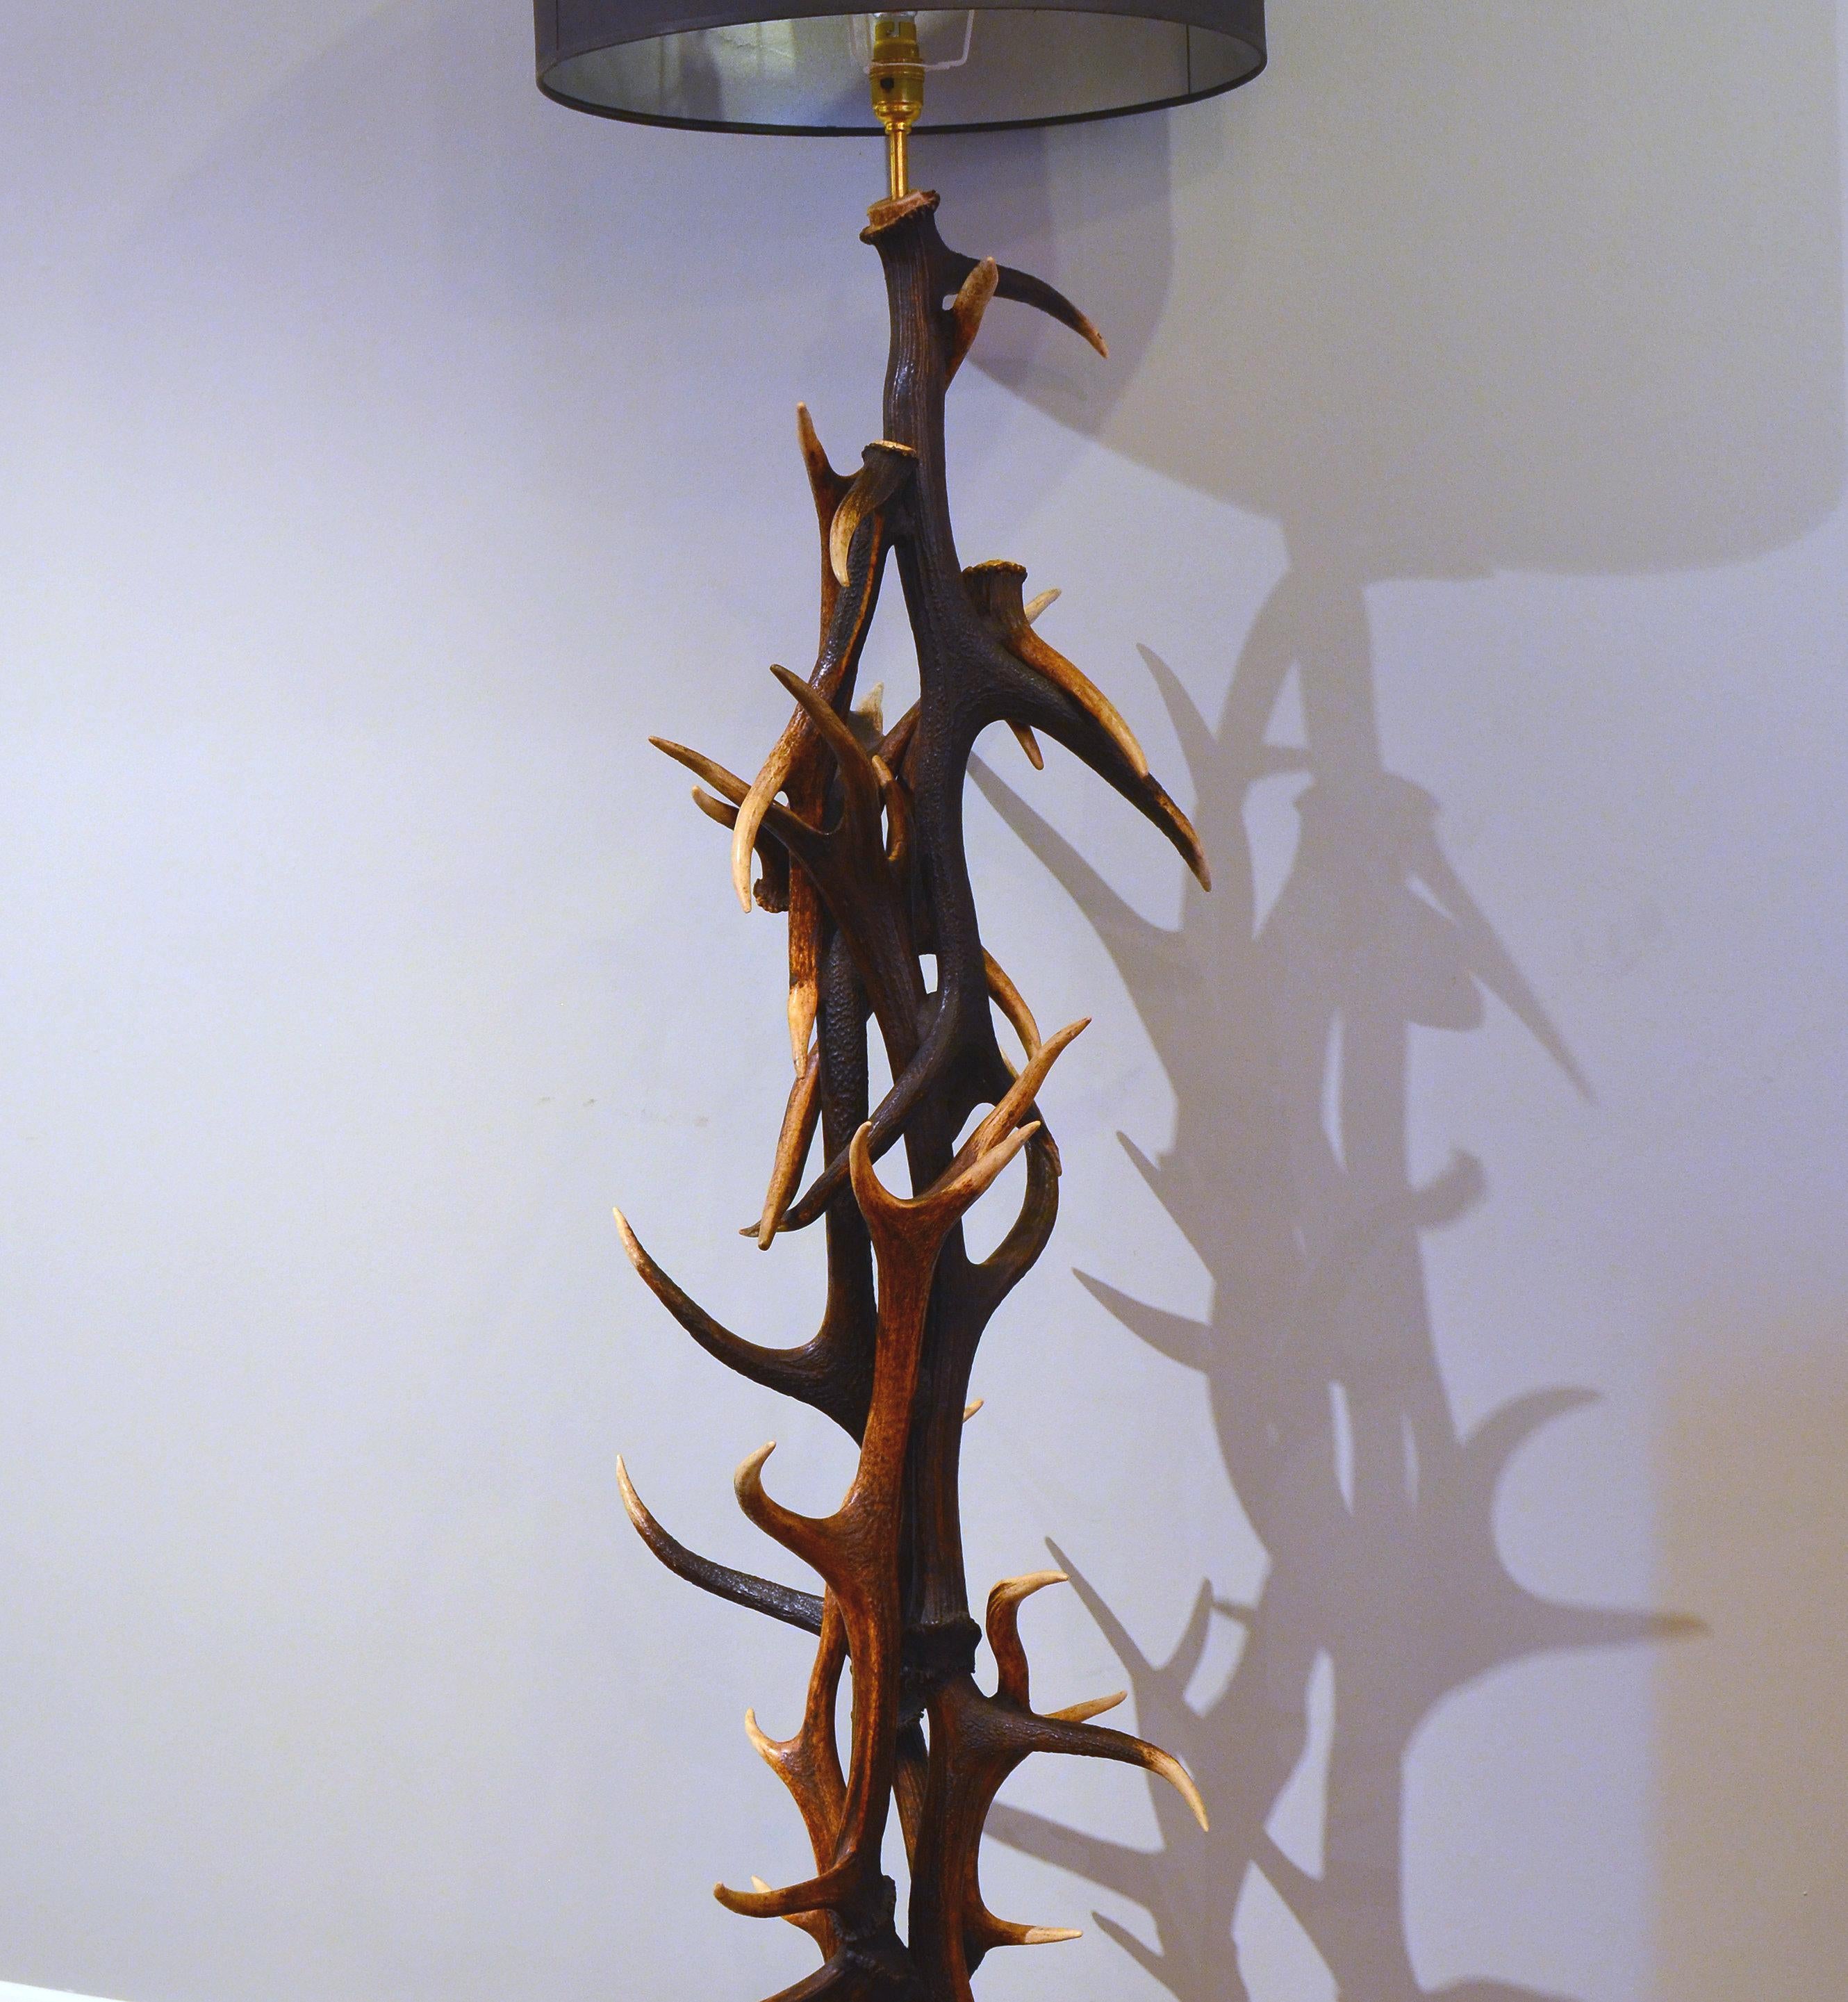 This gorgeous and bespoke made deer antler floor standing lamp is made up of naturally shed red deer antler Horn from Scotland. These lamps are unique as no two are alike. The lamp measures approximately 63 in - 1560 cm in height with a diameter 17